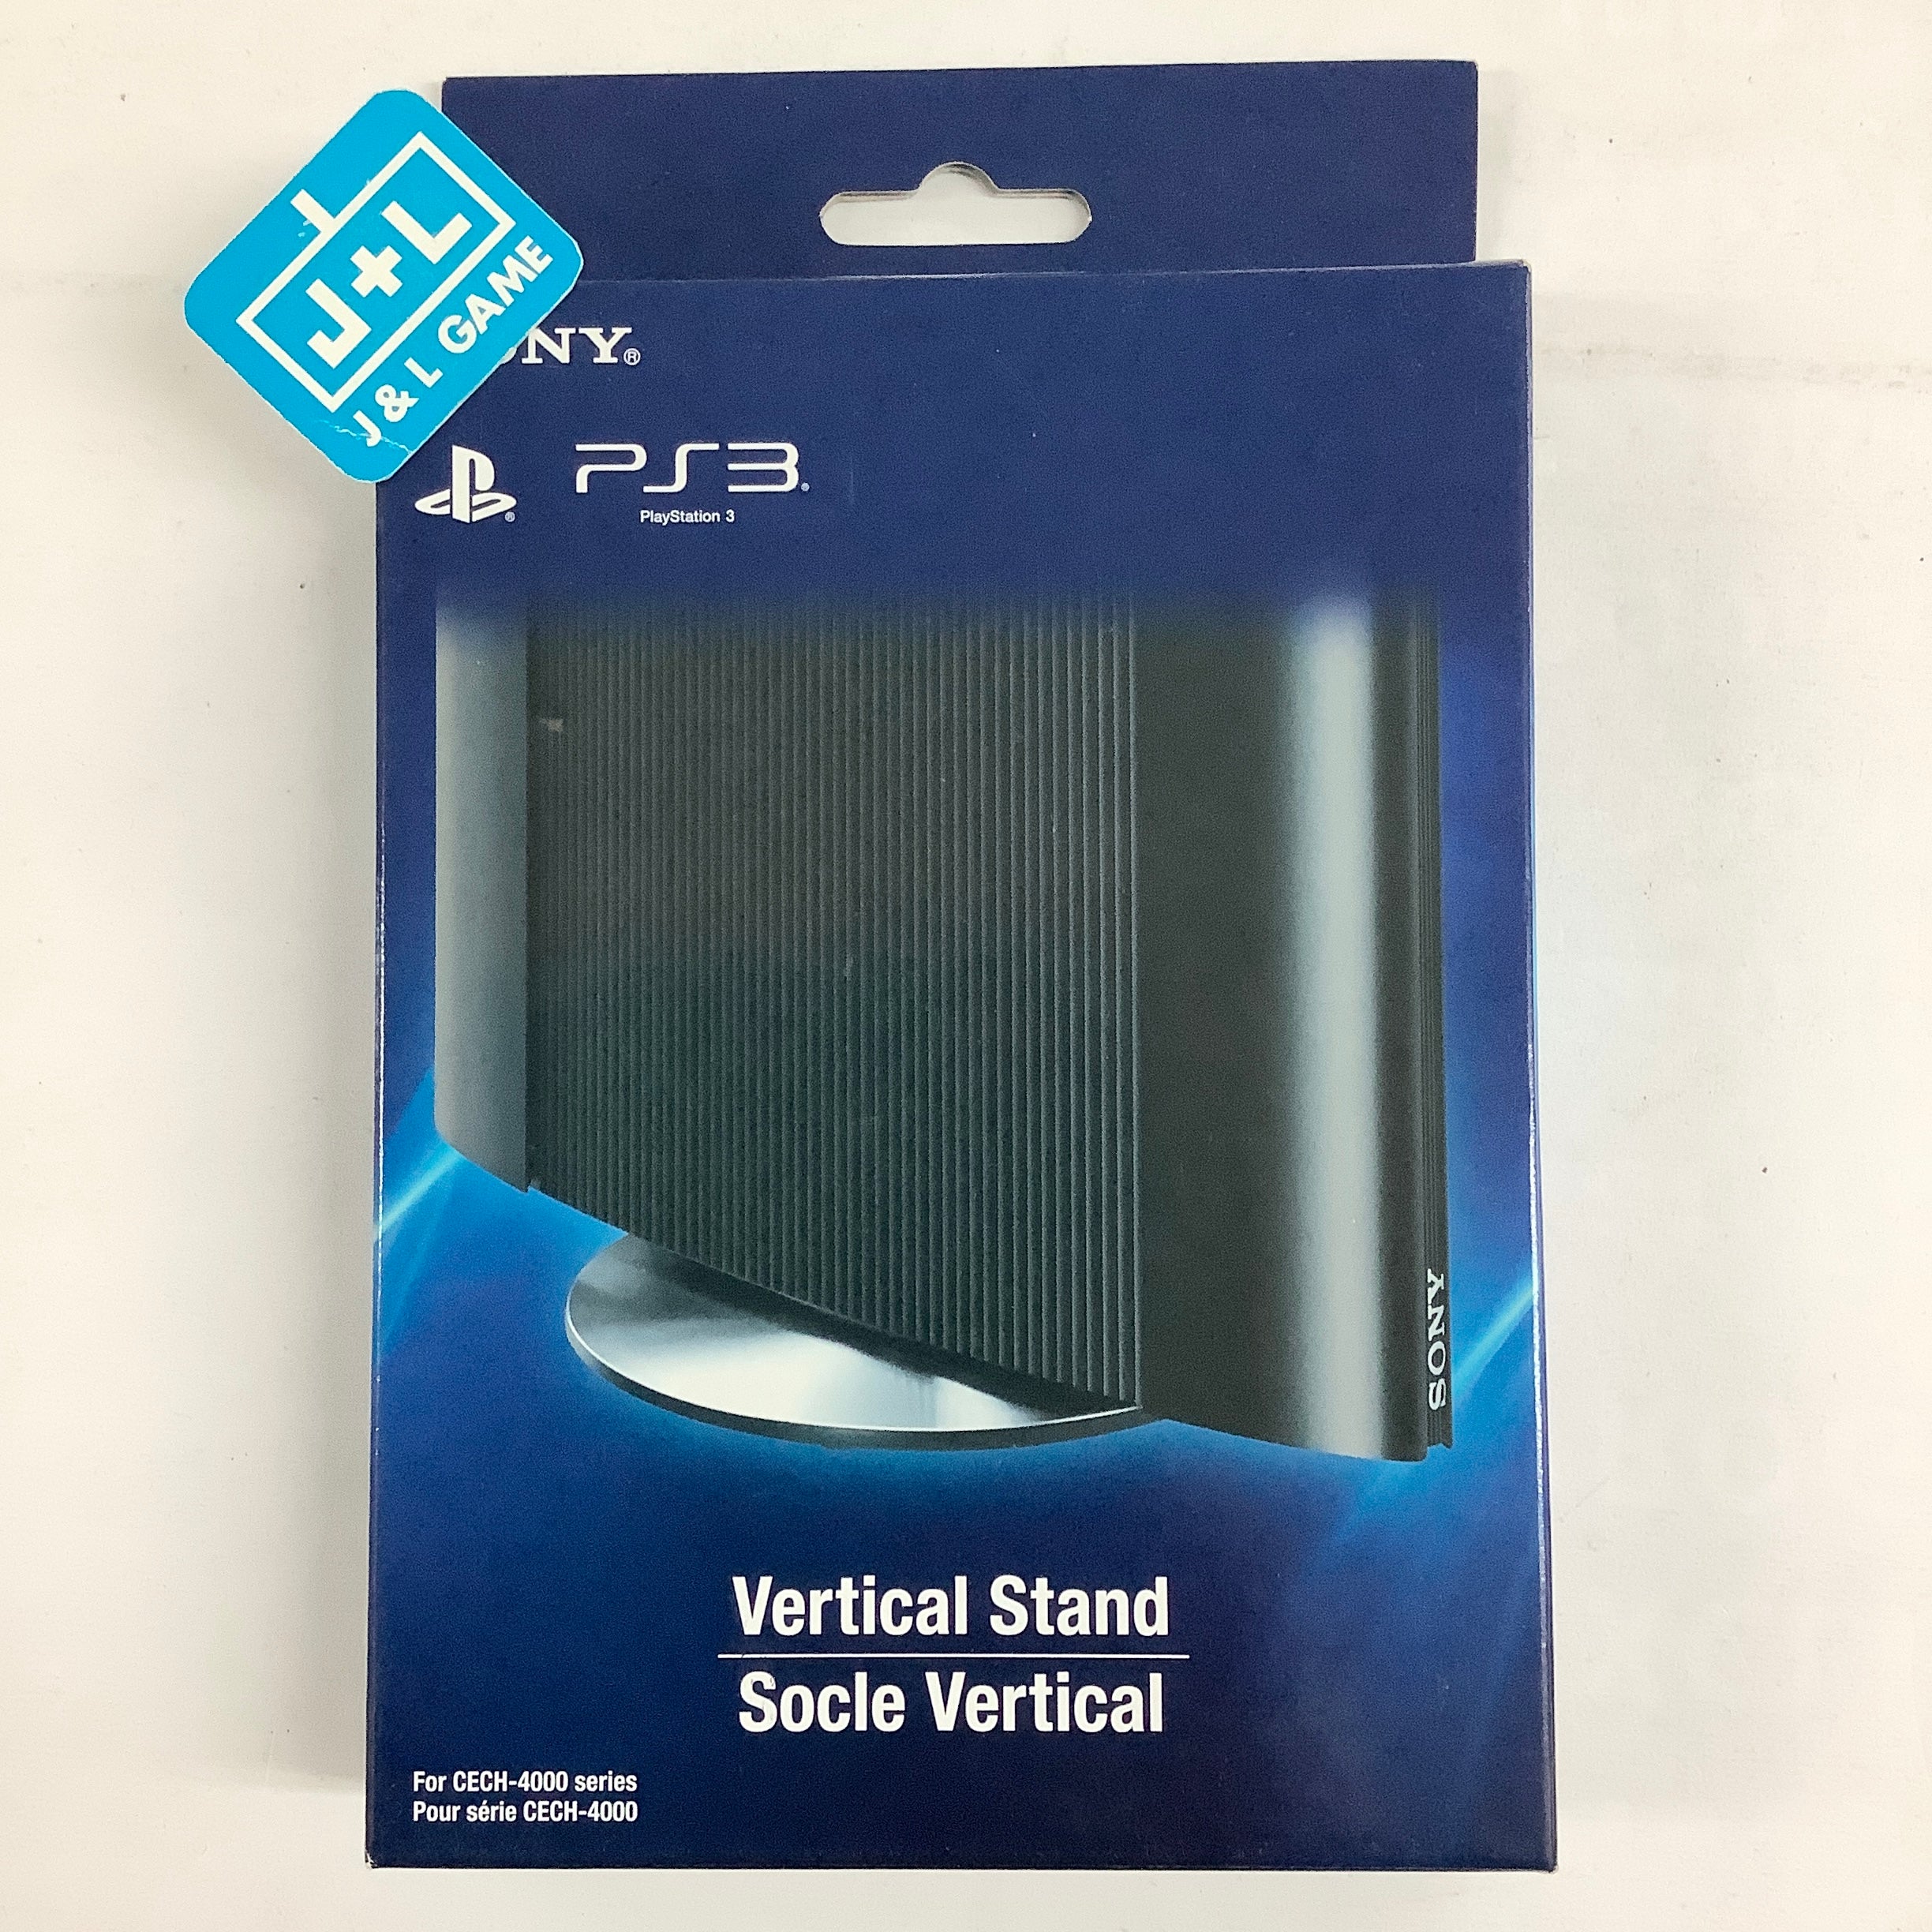 SONY Playstation 3 Vertical Stand for Super Slim Consoles (Cech-4000 Series) - (PS3) Playstation 3 Accessories Sony   